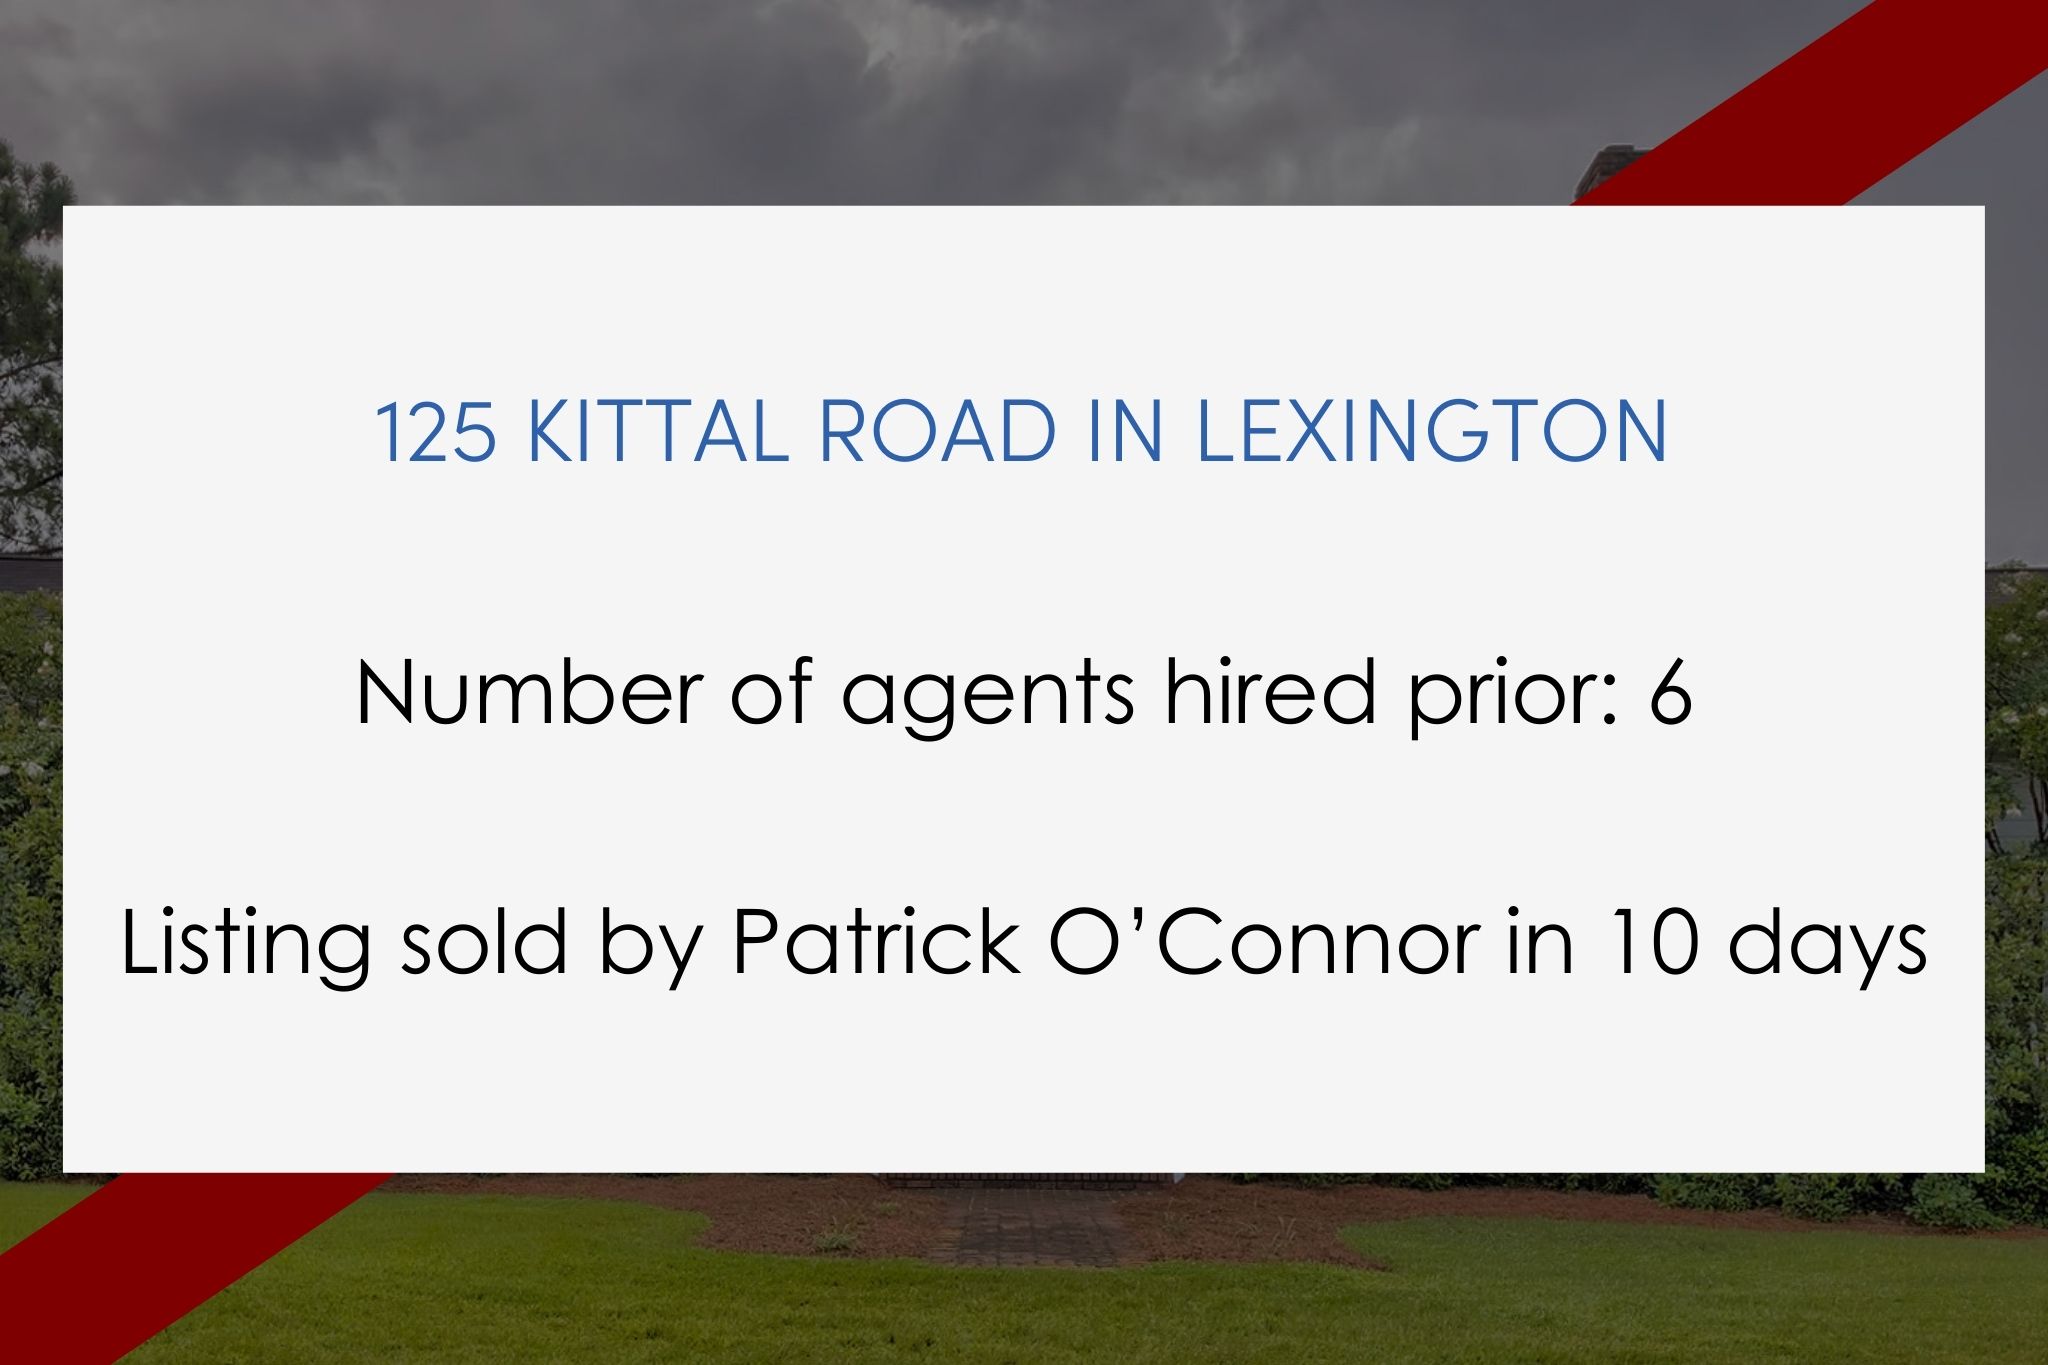 Number of agents hired prior: 6. Listing sold by Patrick O’Connor in 10 days.